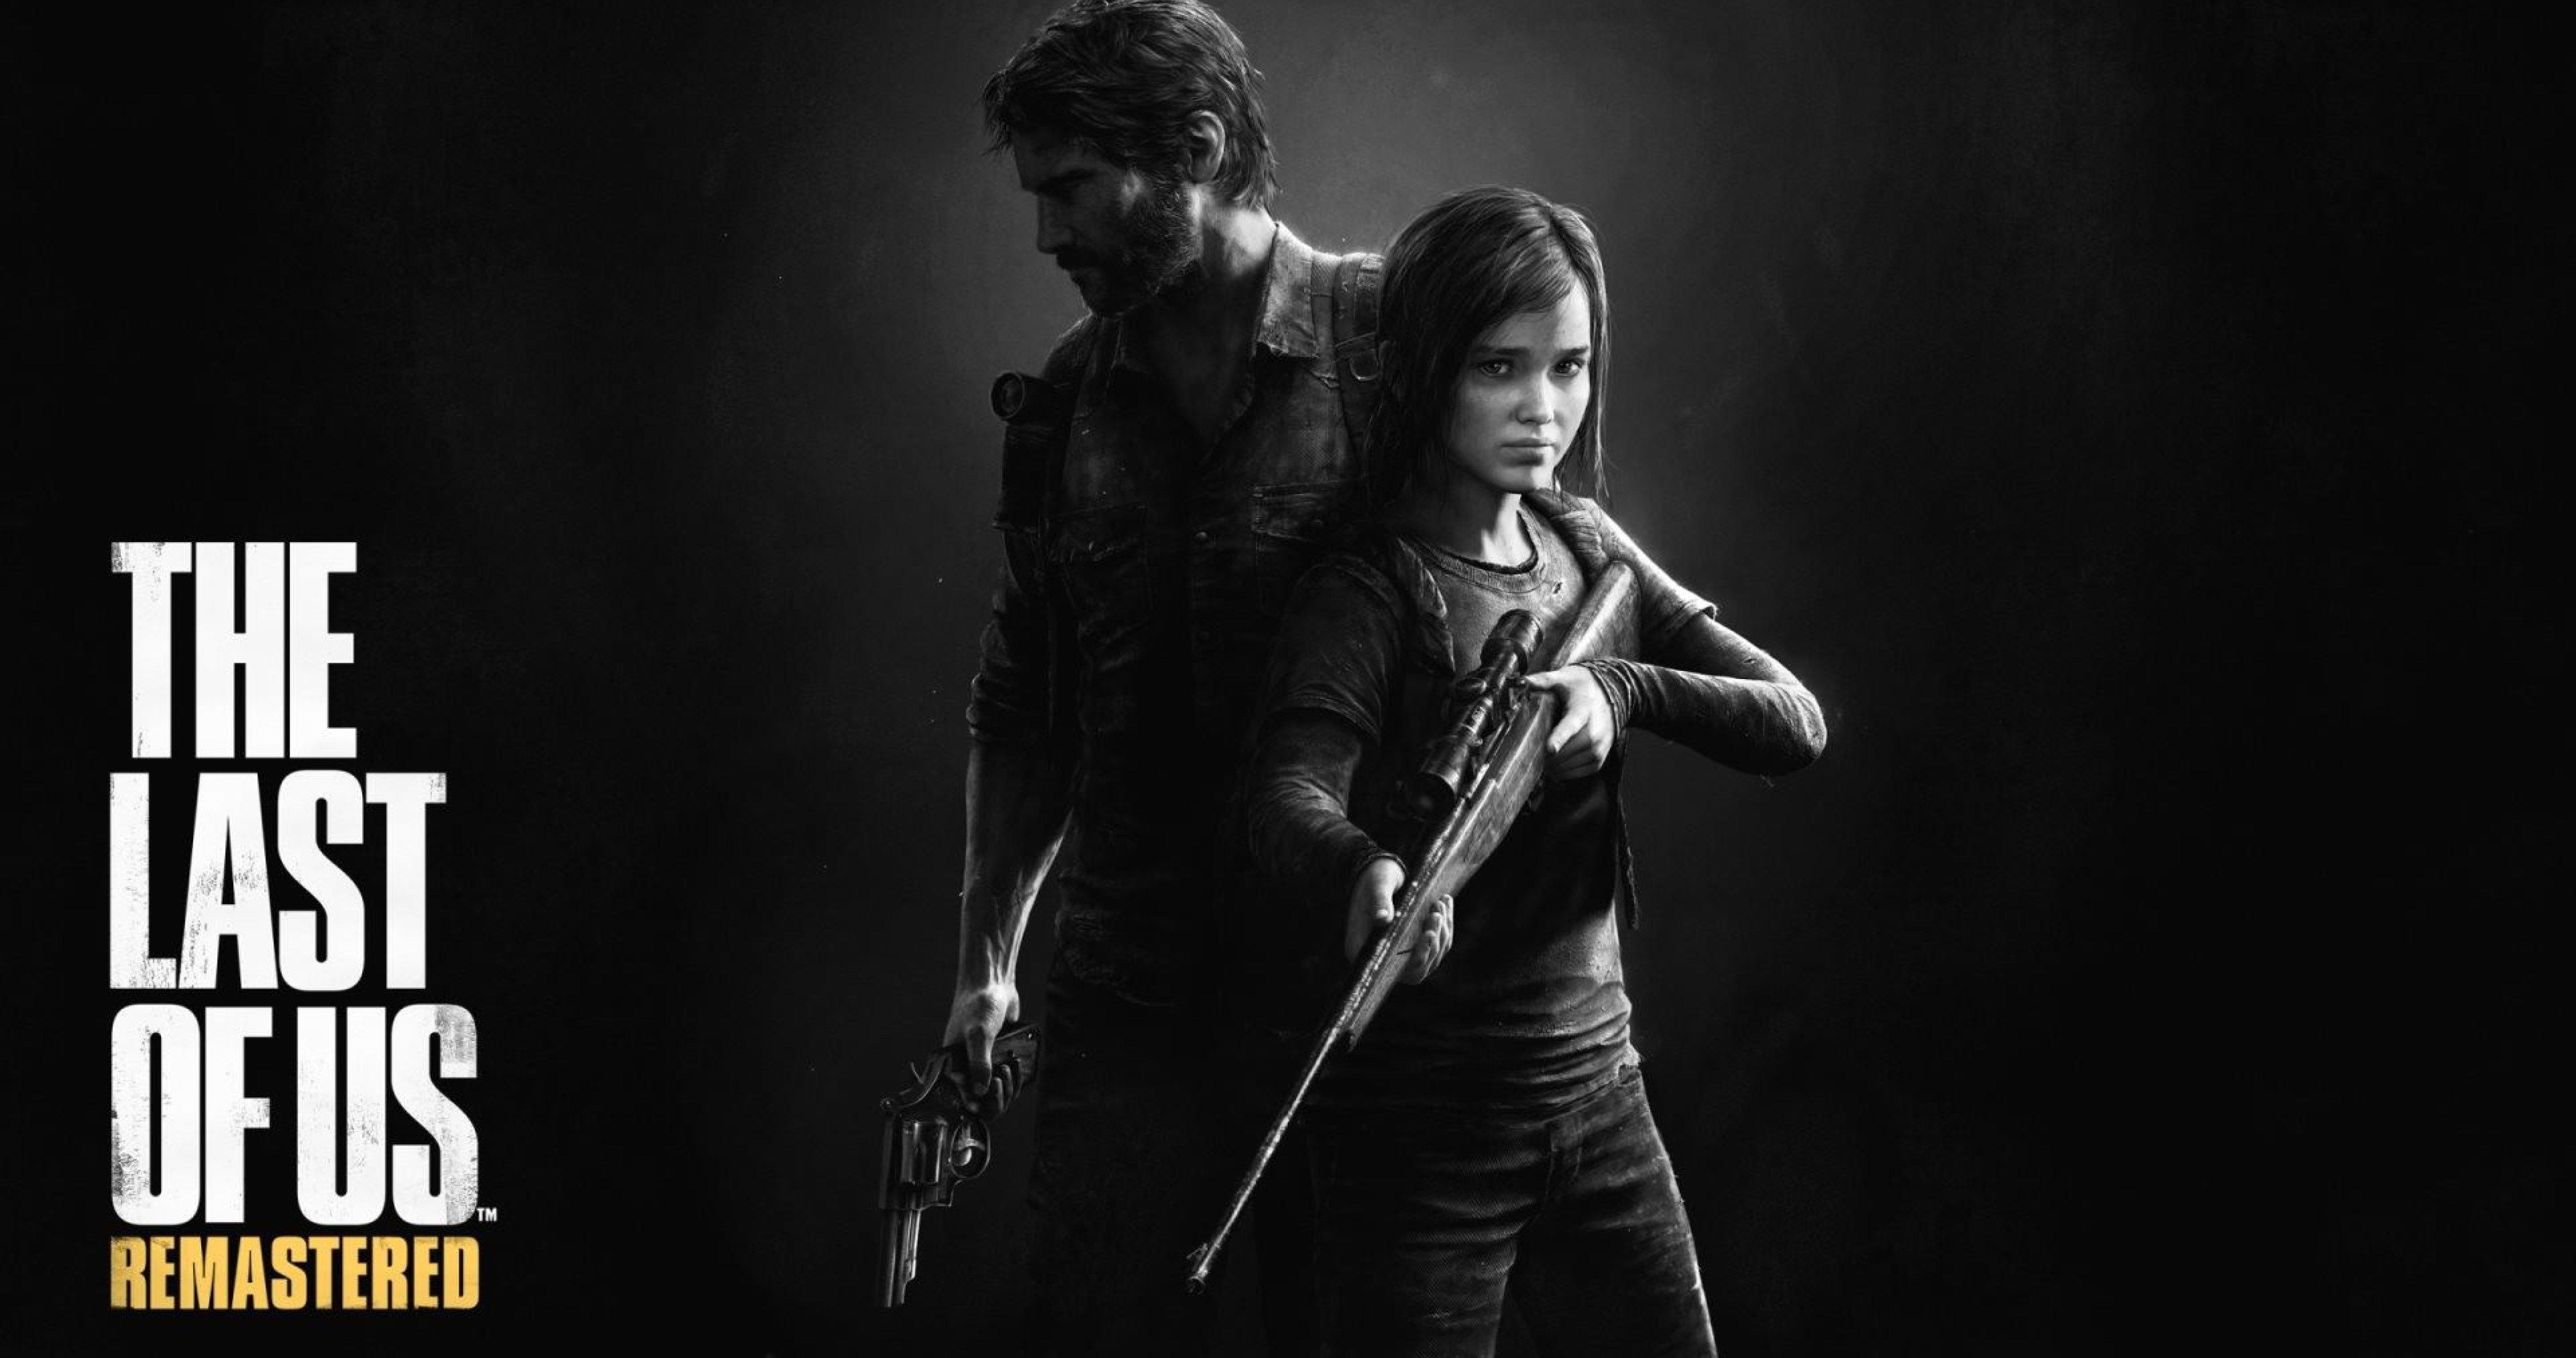 the last of us video game 4k ultra HD wallpaper. The last of us, Last of us remastered, Joel and ellie